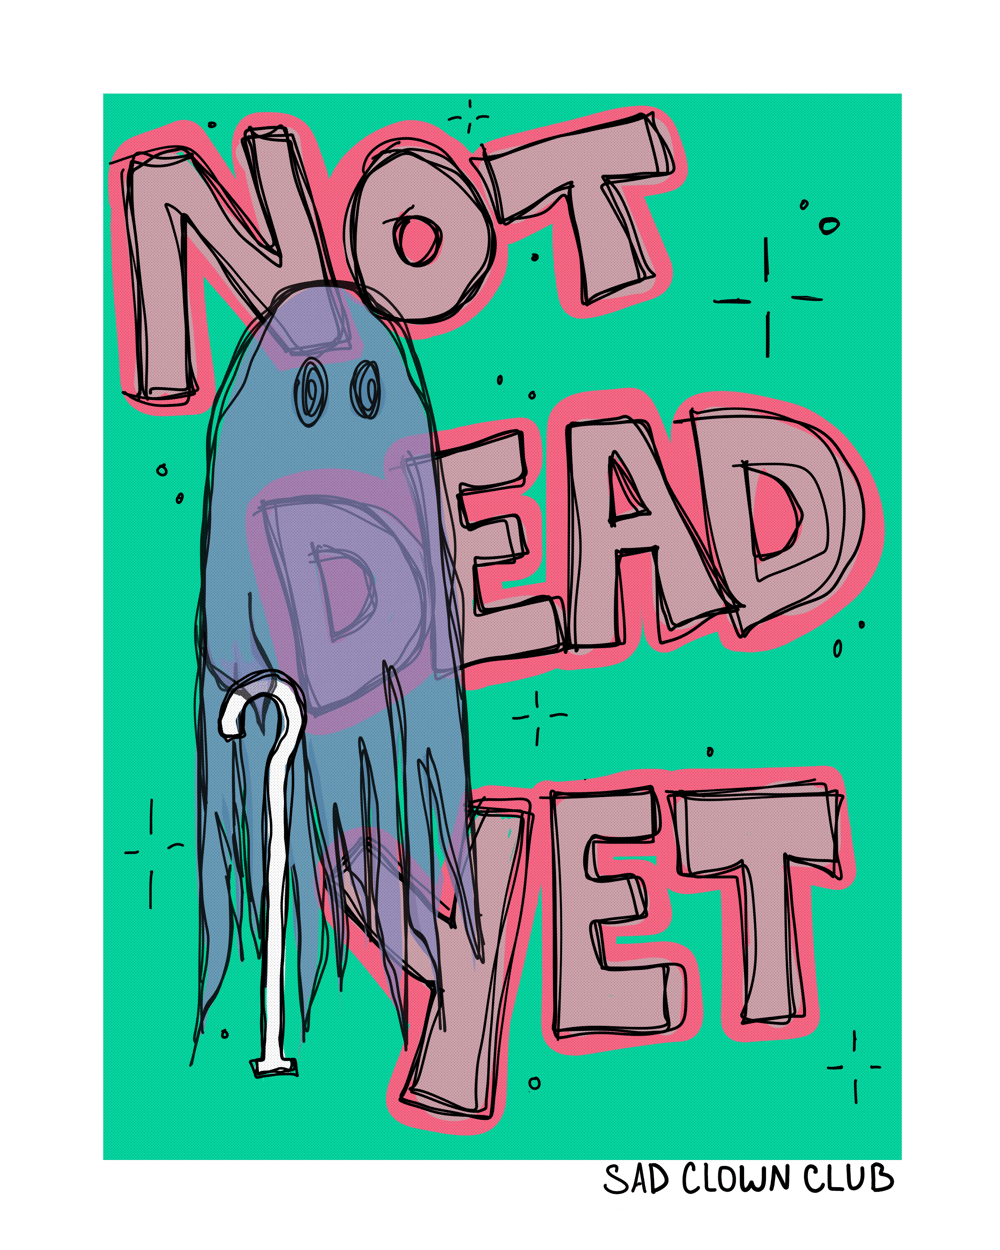 Image of "Not Dead Yet" Print / Sticker